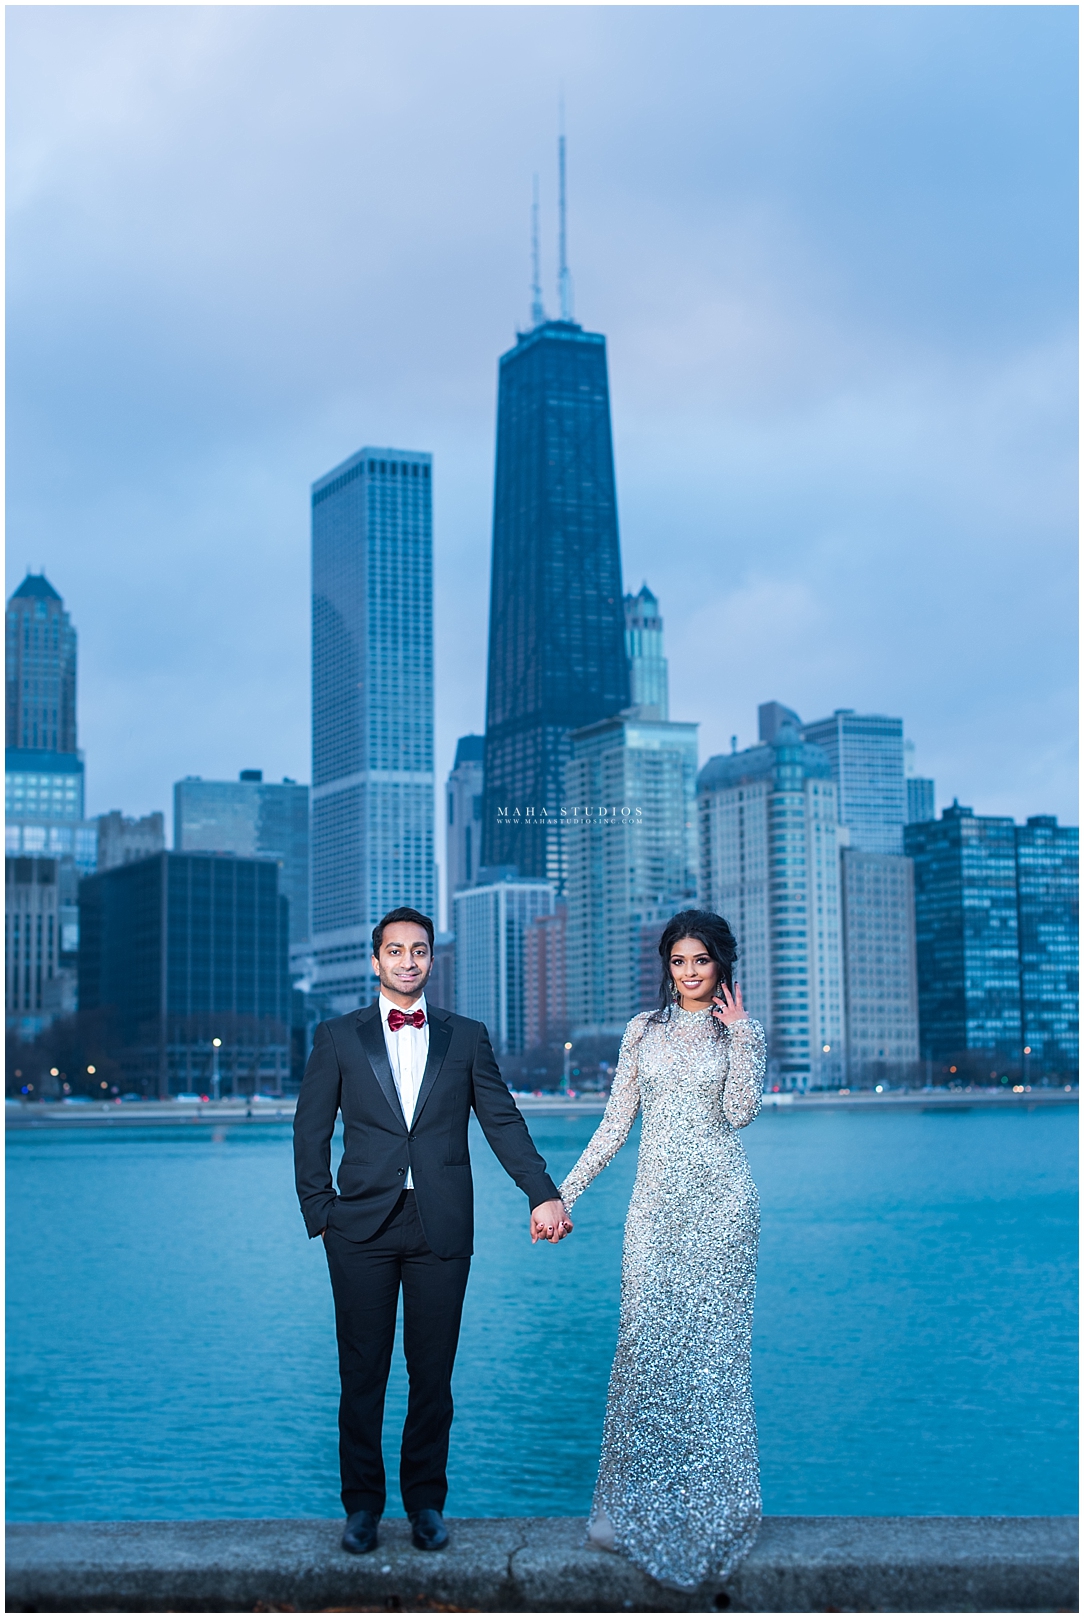 Chicago Engagement Photos after sunset in winter